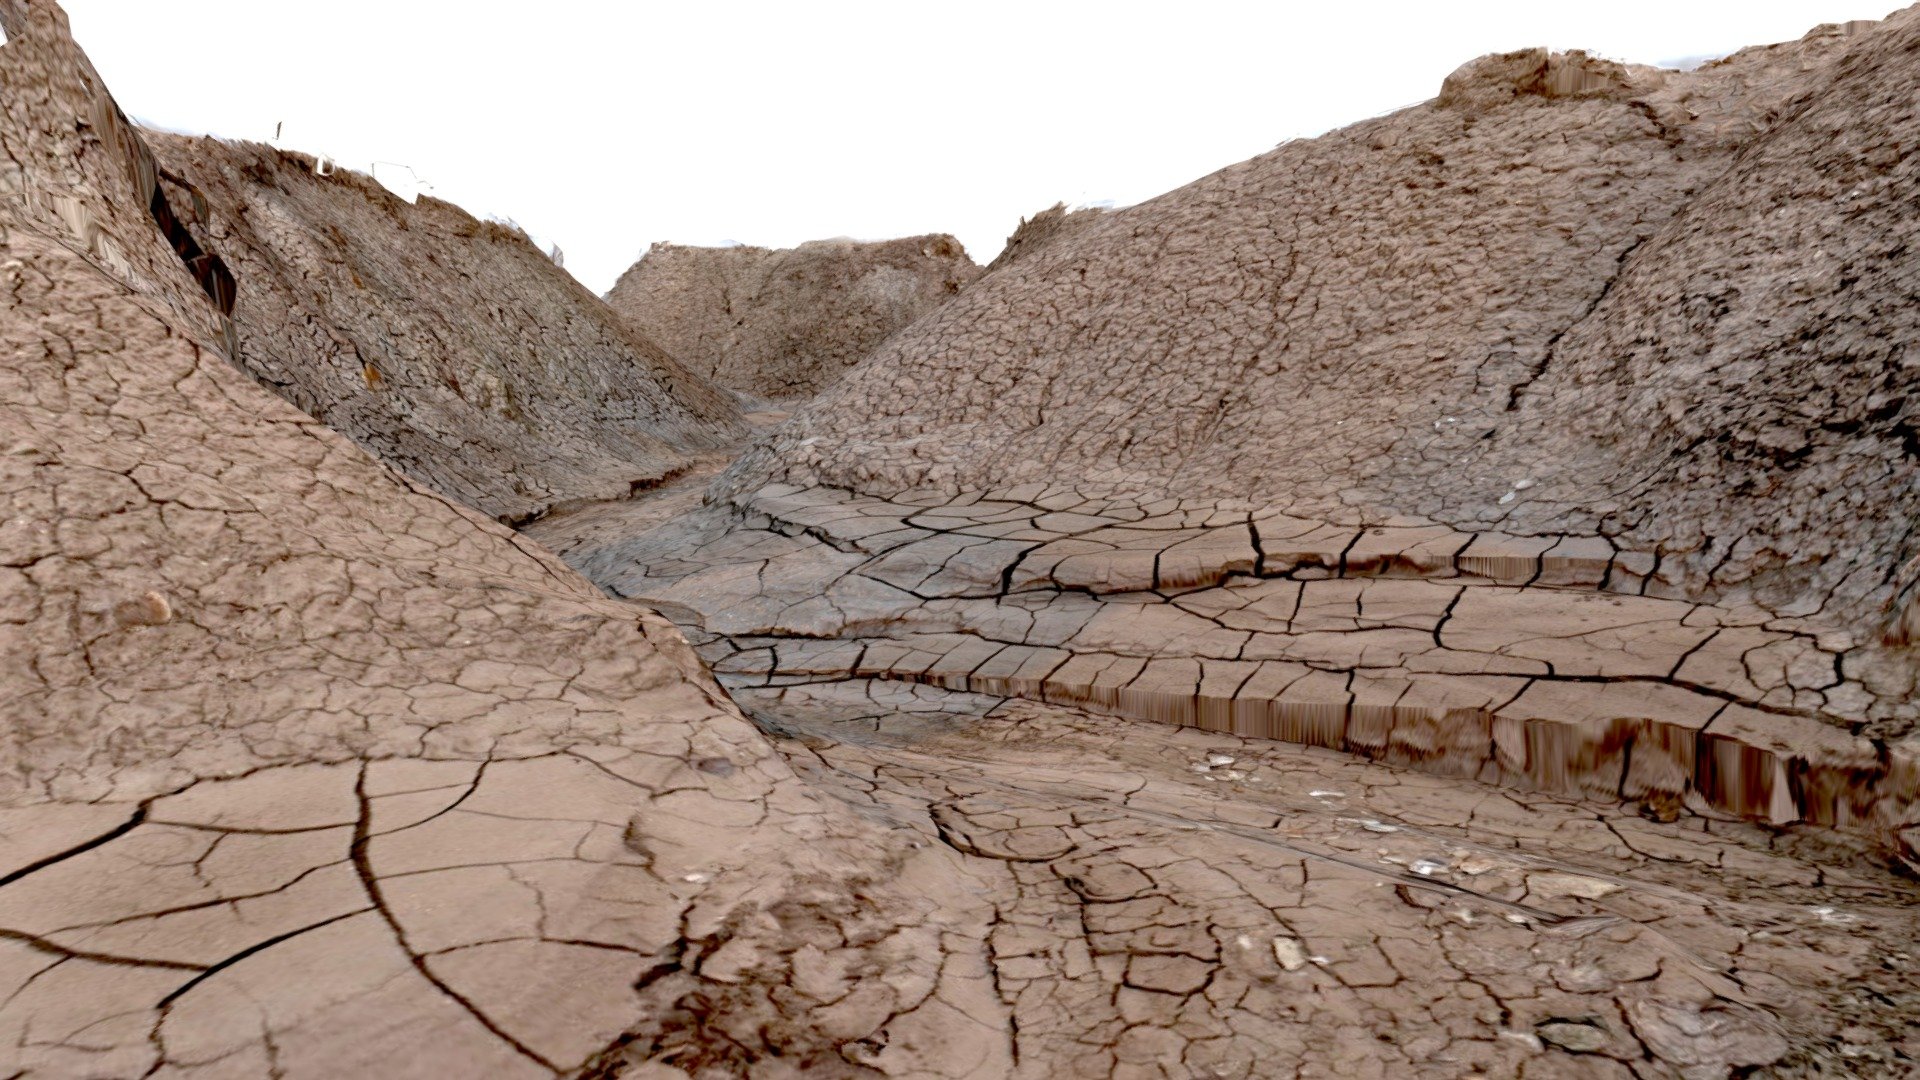 3D Scan of 70 meter desert ravine found arount Bombay Beach, California in Sonoran Desert.
 This photogrometry madel was made from 120 photoes taken on on Lumix S5 and processed with Agisoft Metashape software.

This is low-res mesh (10 000 polygons) with one 8k texture and normal map made from hi-res mesh 3d model